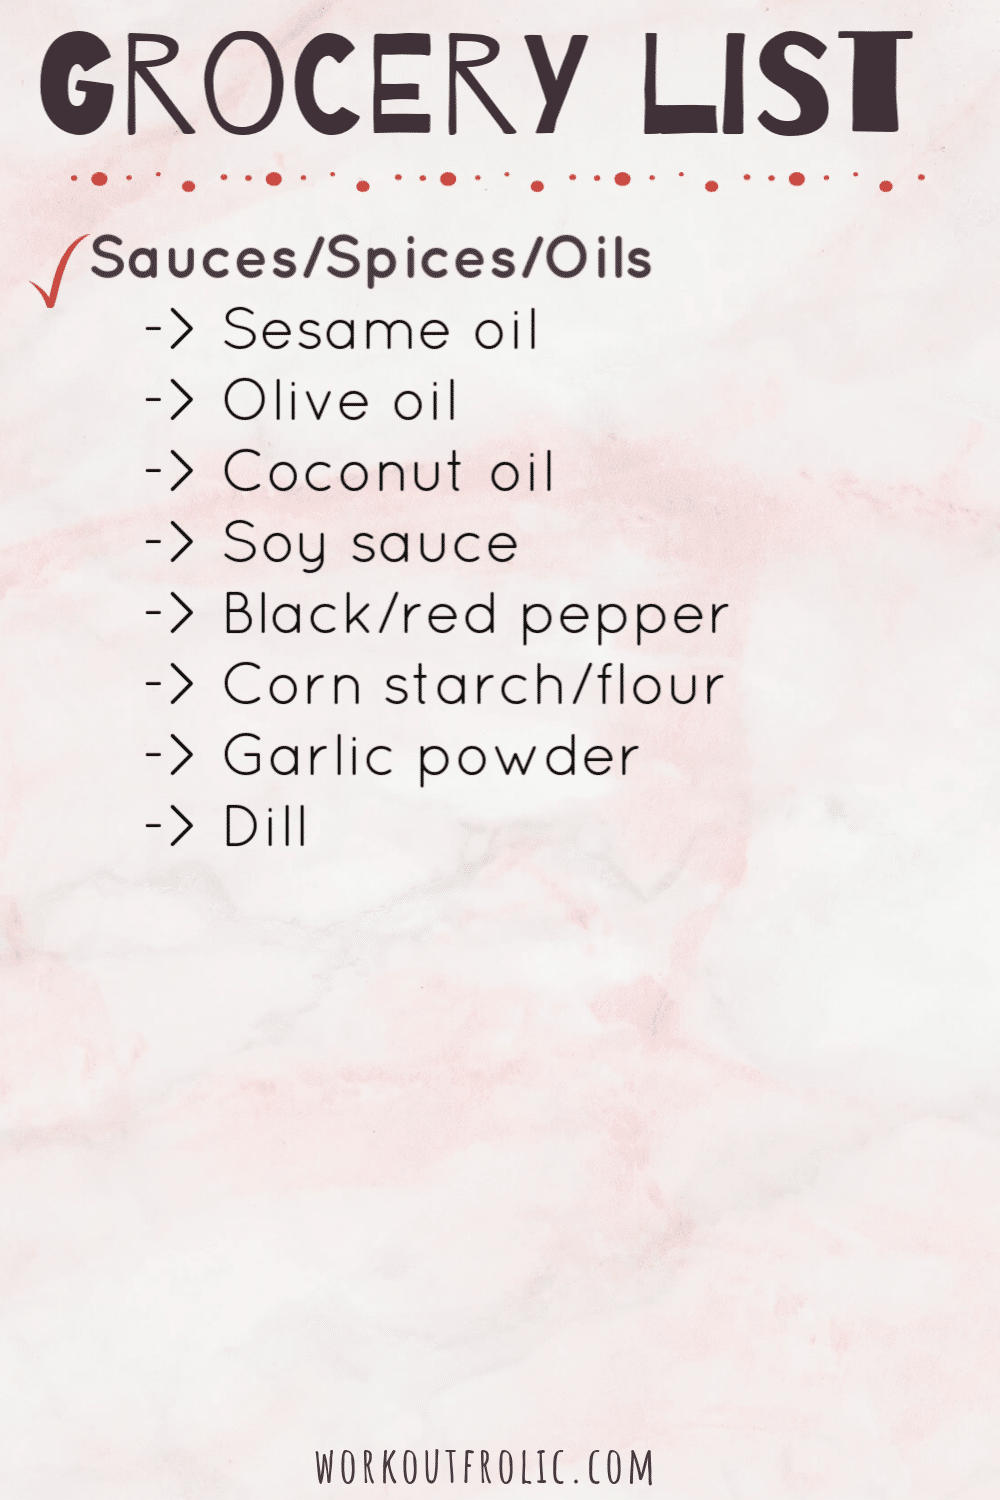 grocery list for easy meal prep of salmon chicken and potatoes from article "Easy meal prep ideas for dinner"